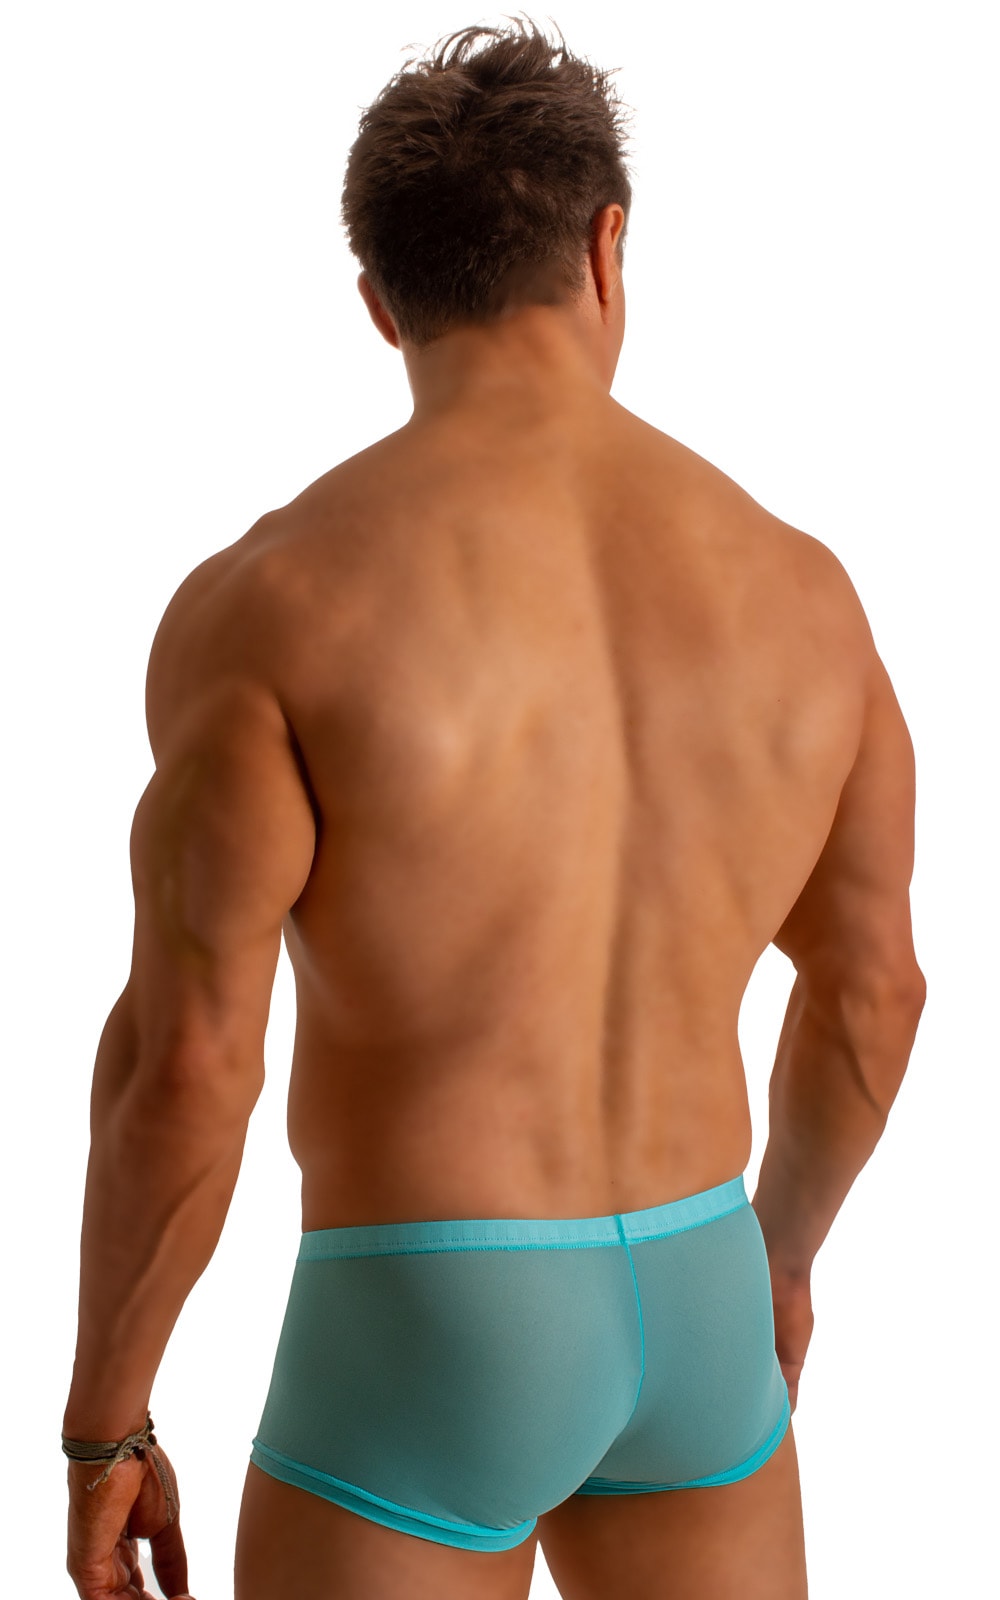 Extreme Low Square Cut Swim Trunks in Super ThinSKINZ Sky 2